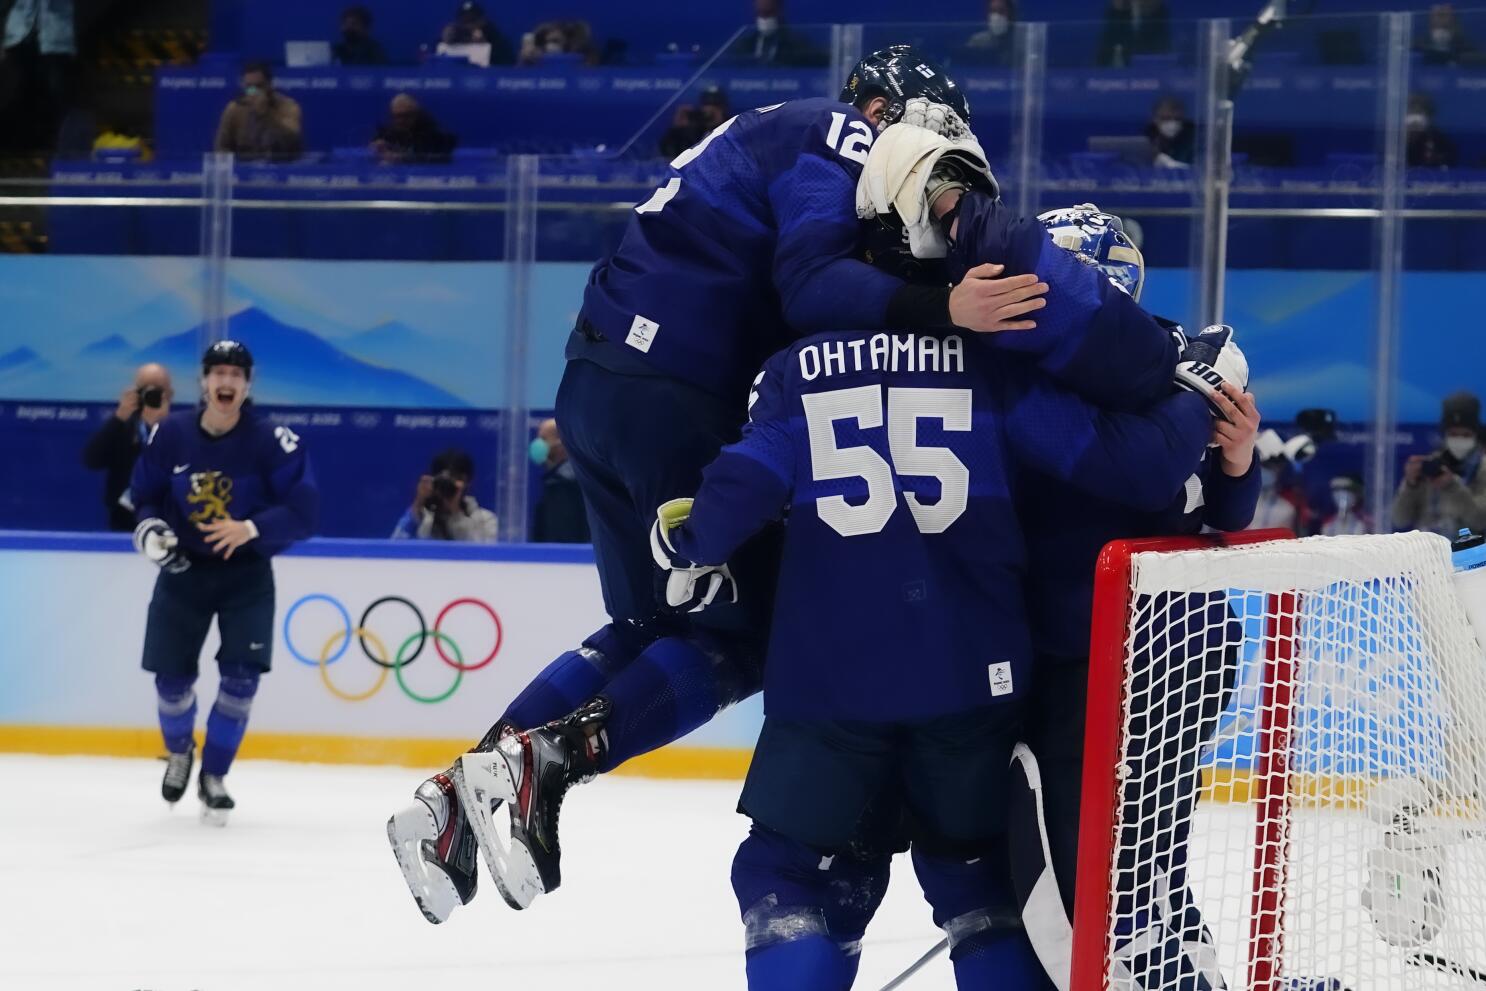 ROC, United States and Finland submit NHL players for Beijing 2022 squads